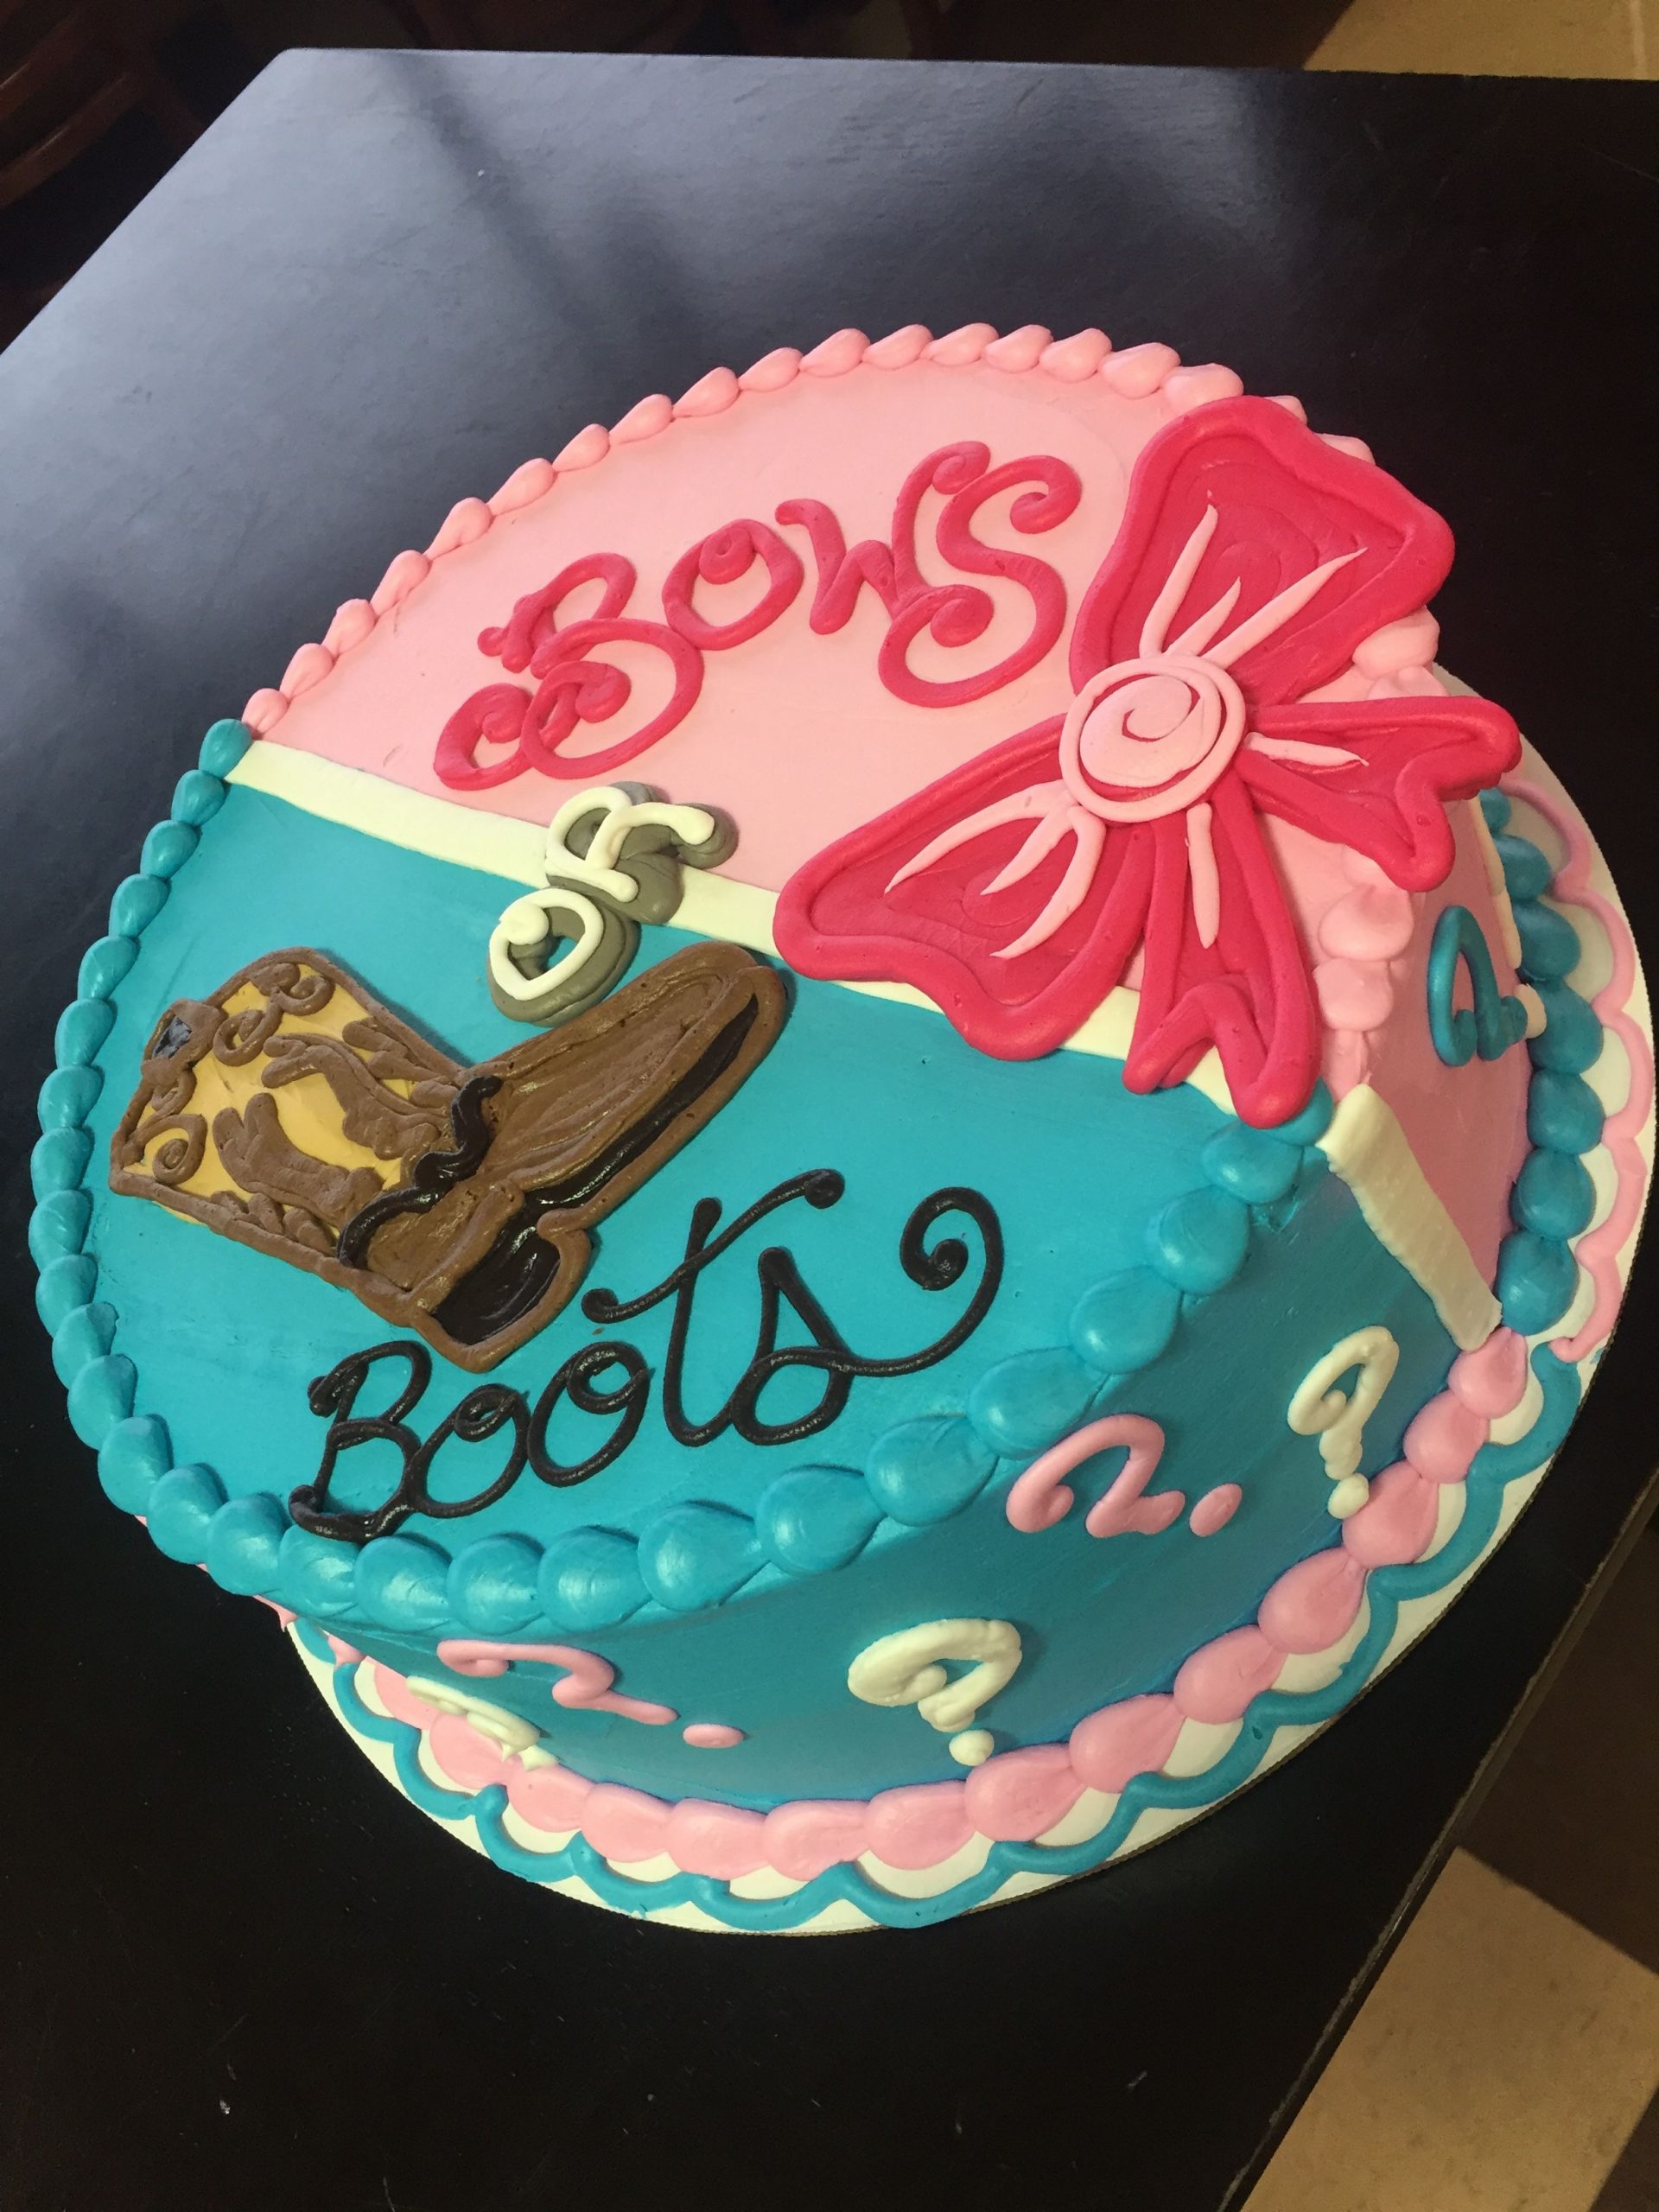 Boots or Bows Gender Reveal Cake